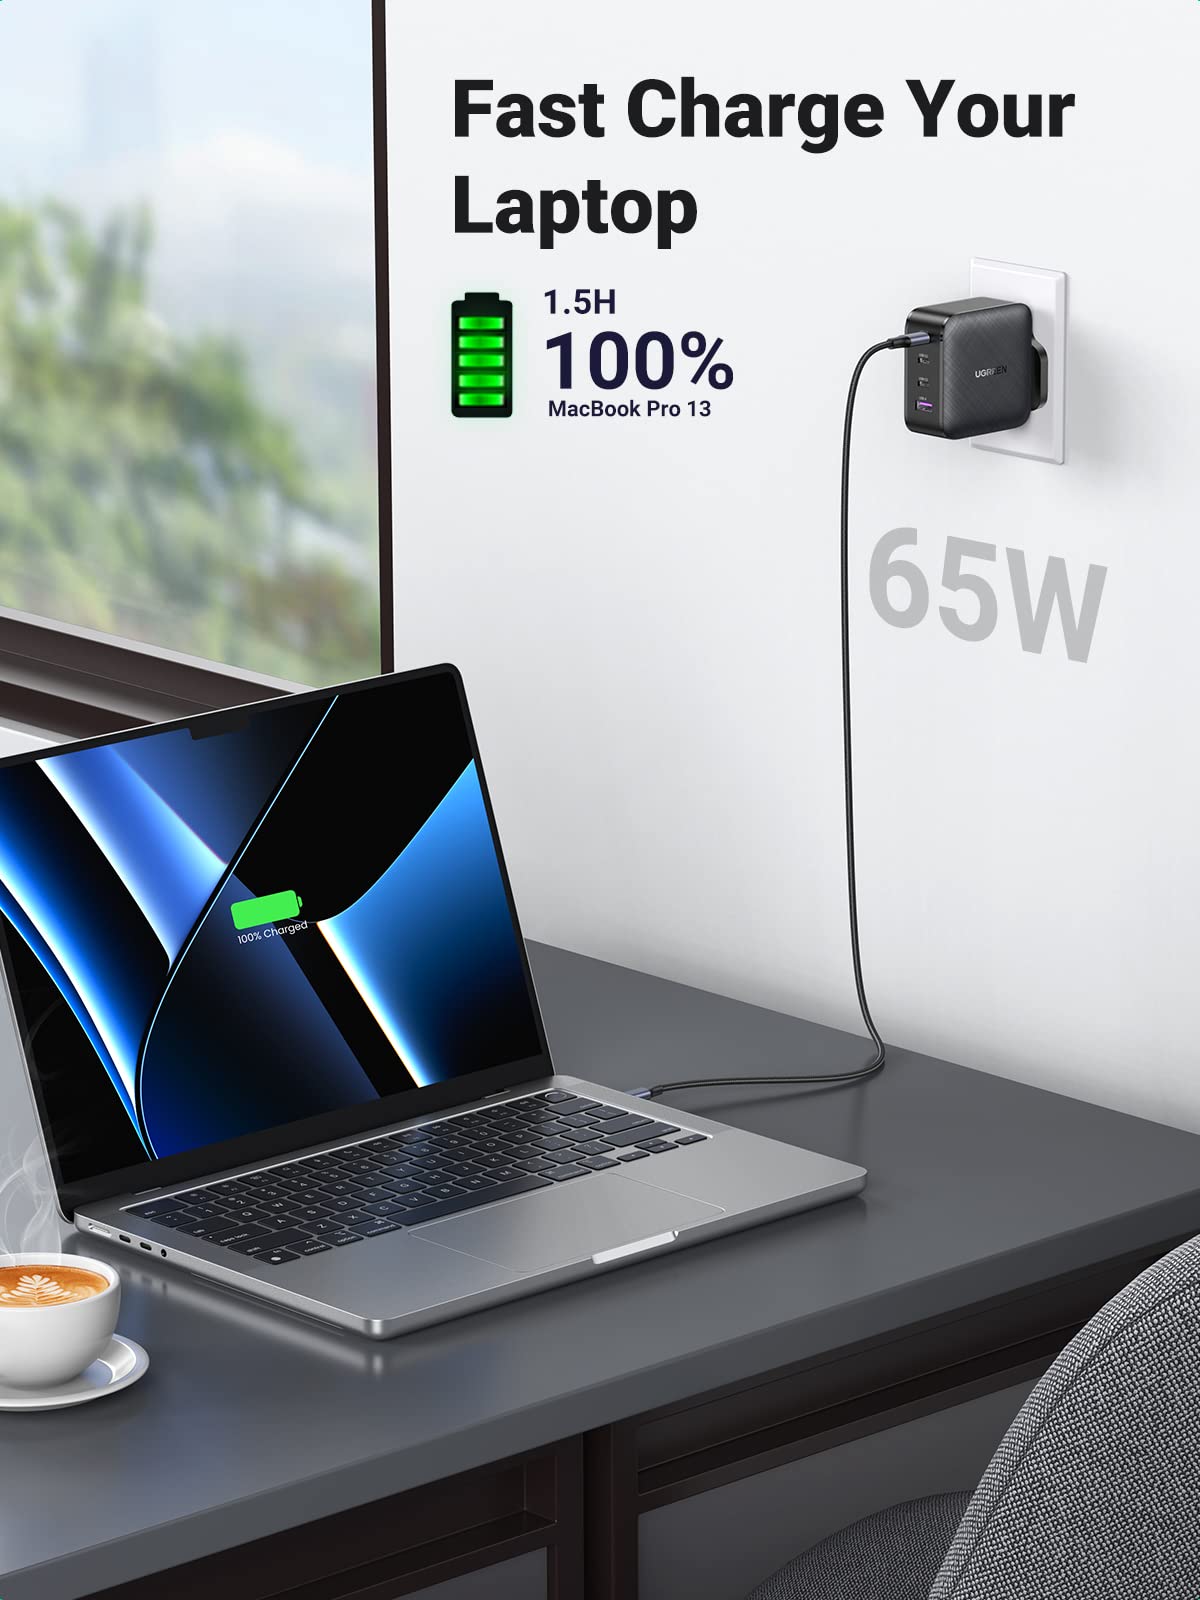 Ugreen 65W Wall Charger 3C1A UK - Space Gray